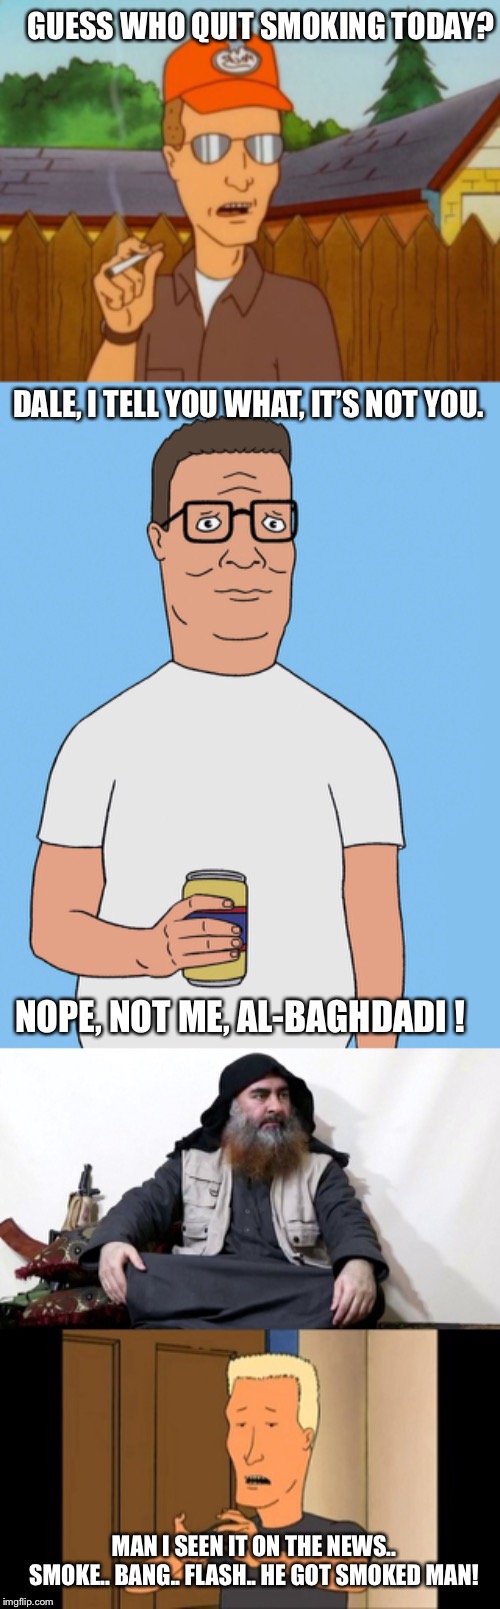 Dale Gribble, Hank Hill, al-Baghdadi | GUESS WHO QUIT SMOKING TODAY? DALE, I TELL YOU WHAT, IT’S NOT YOU. NOPE, NOT ME, AL-BAGHDADI ! MAN I SEEN IT ON THE NEWS.. SMOKE.. BANG.. FLASH.. HE GOT SMOKED MAN! | image tagged in boomhauer,hank hill life,dale gribble smoking,smoking,baghdadi | made w/ Imgflip meme maker